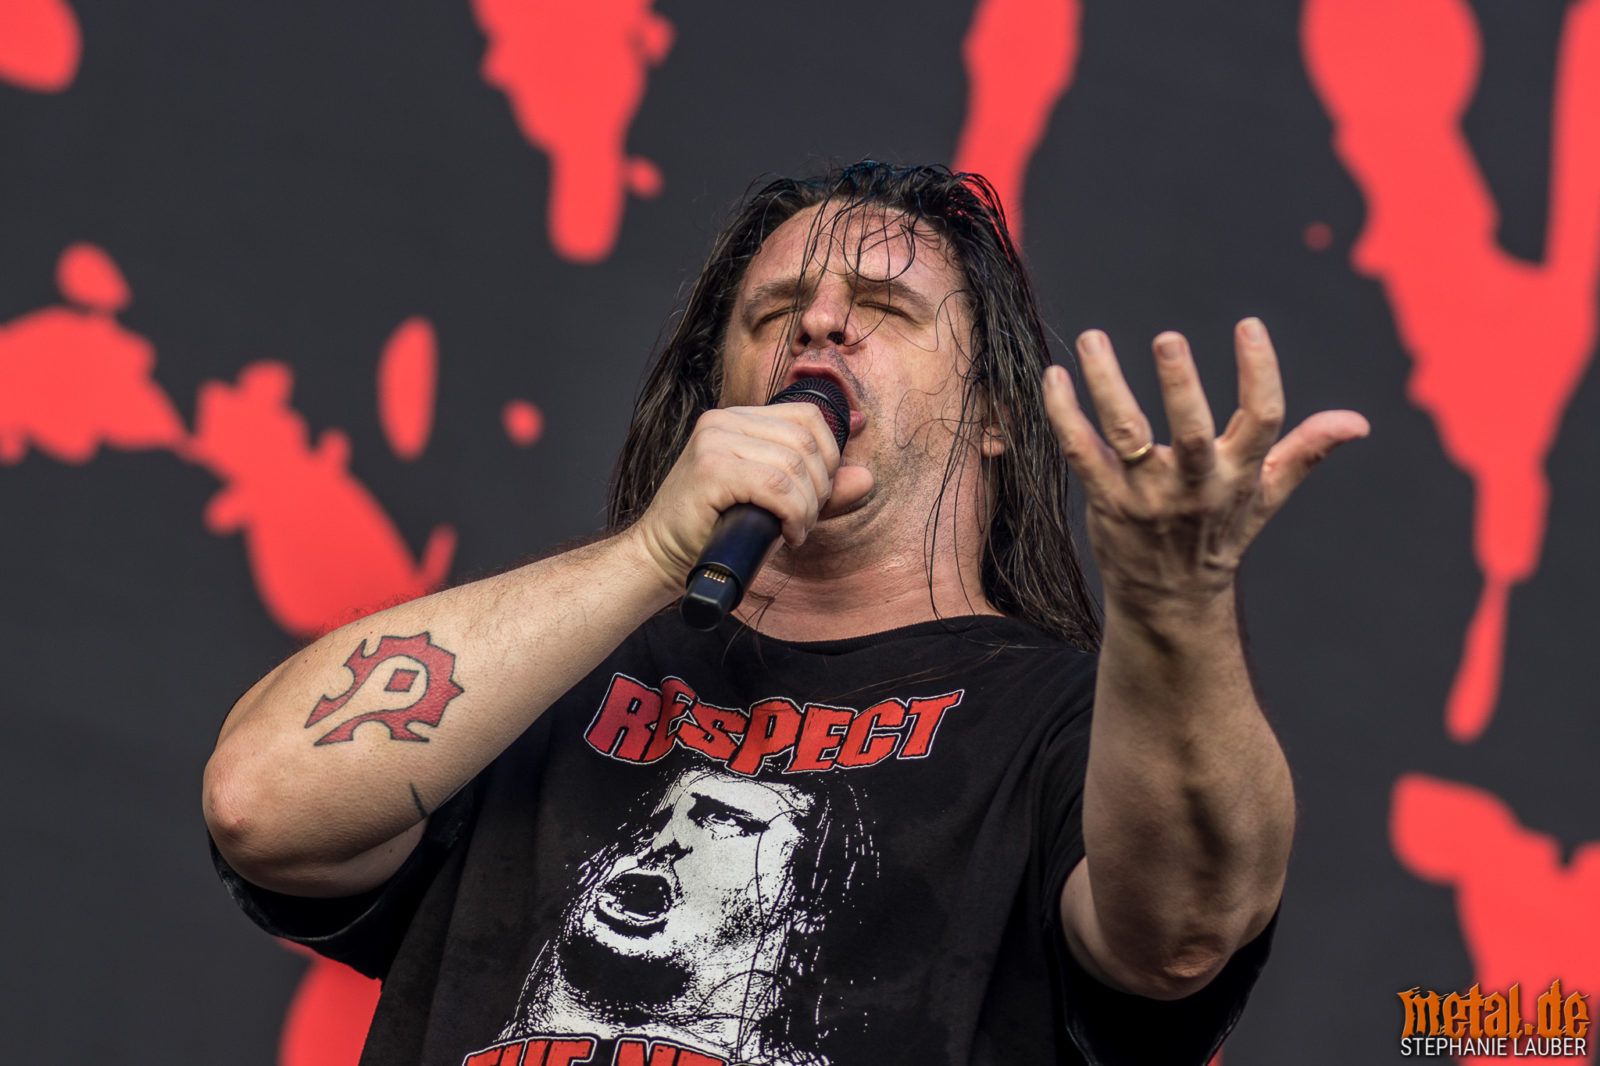 cannibal corpse tour 2023 europe